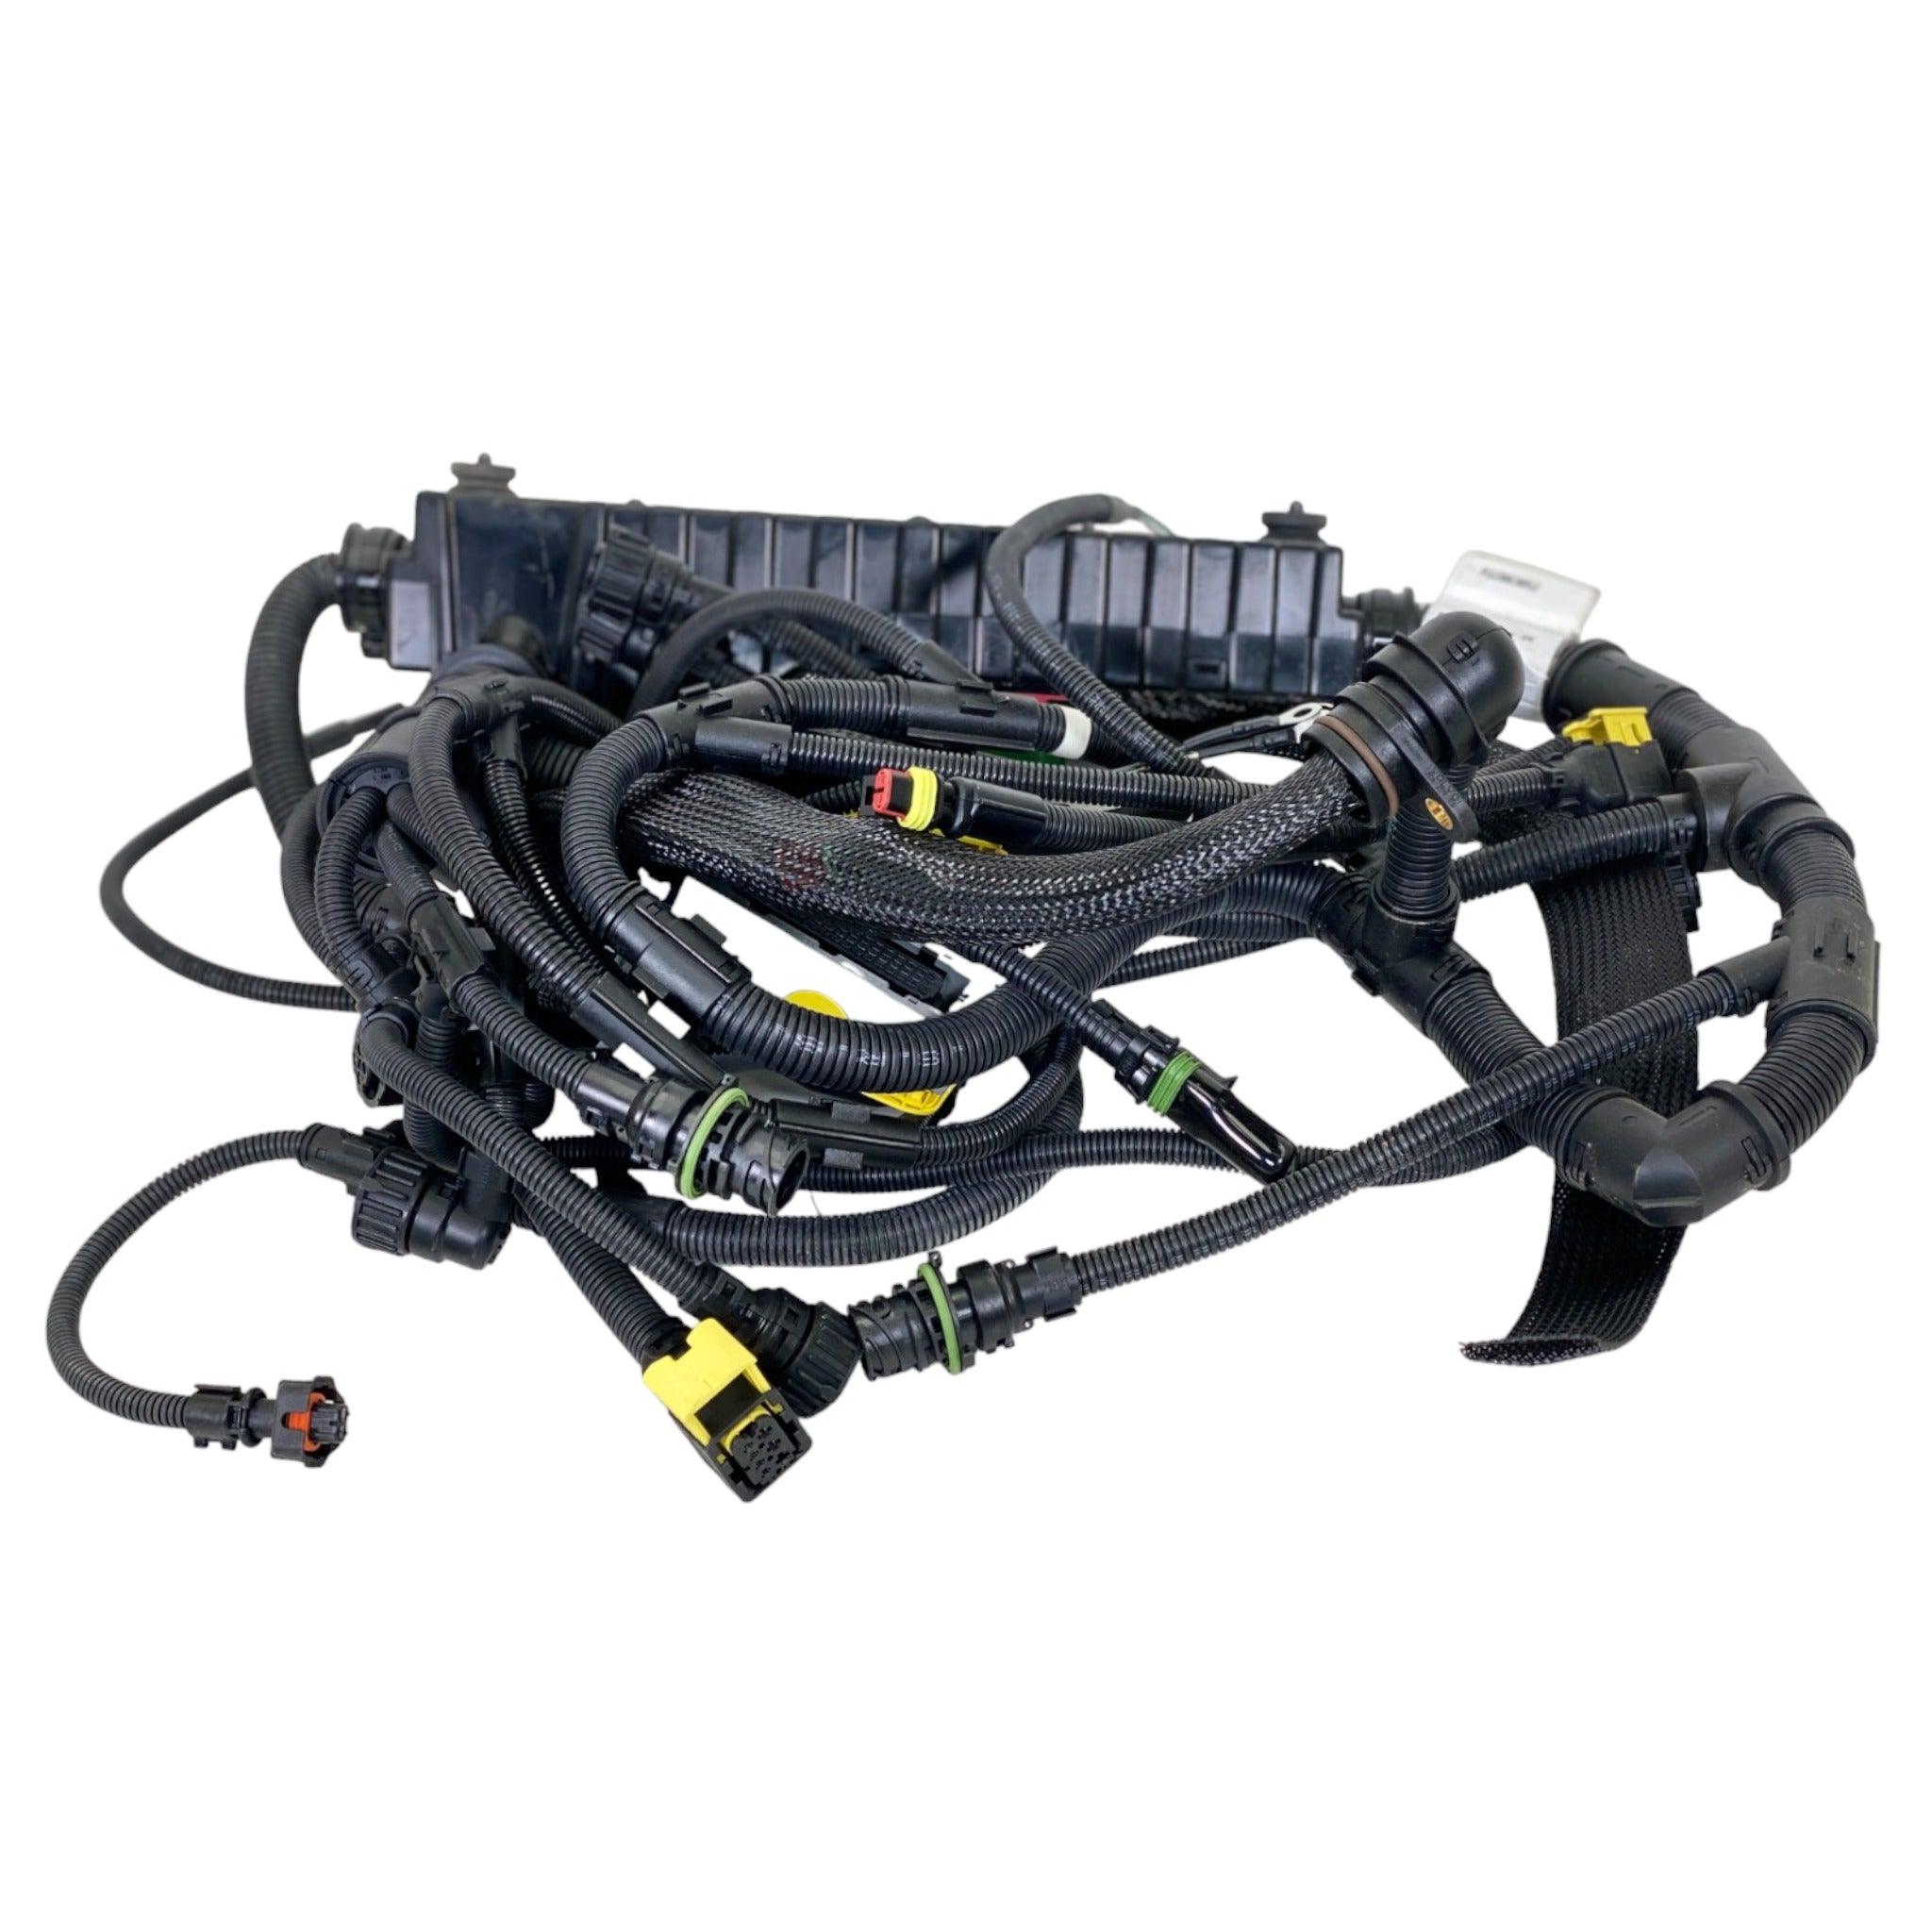 22003052 Oem Volvo Wiring Harness For Volvo D13 Mack Mp8 - ADVANCED TRUCK PARTS